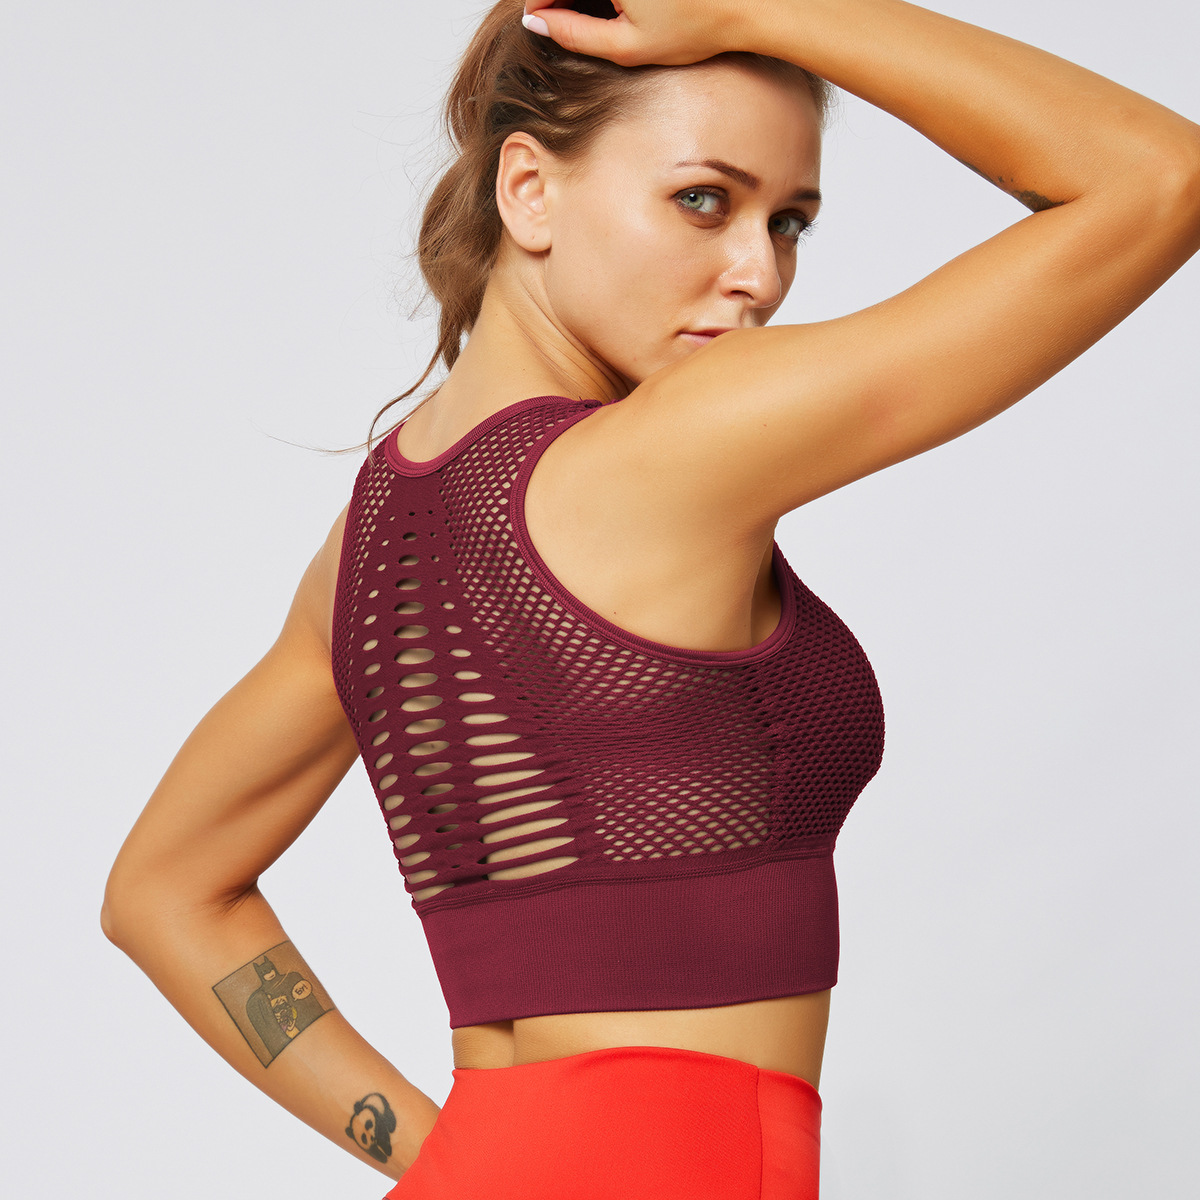  Stylish sports bra with perforated mesh and beautiful lines that fits your body shape, high quality and thin sports products